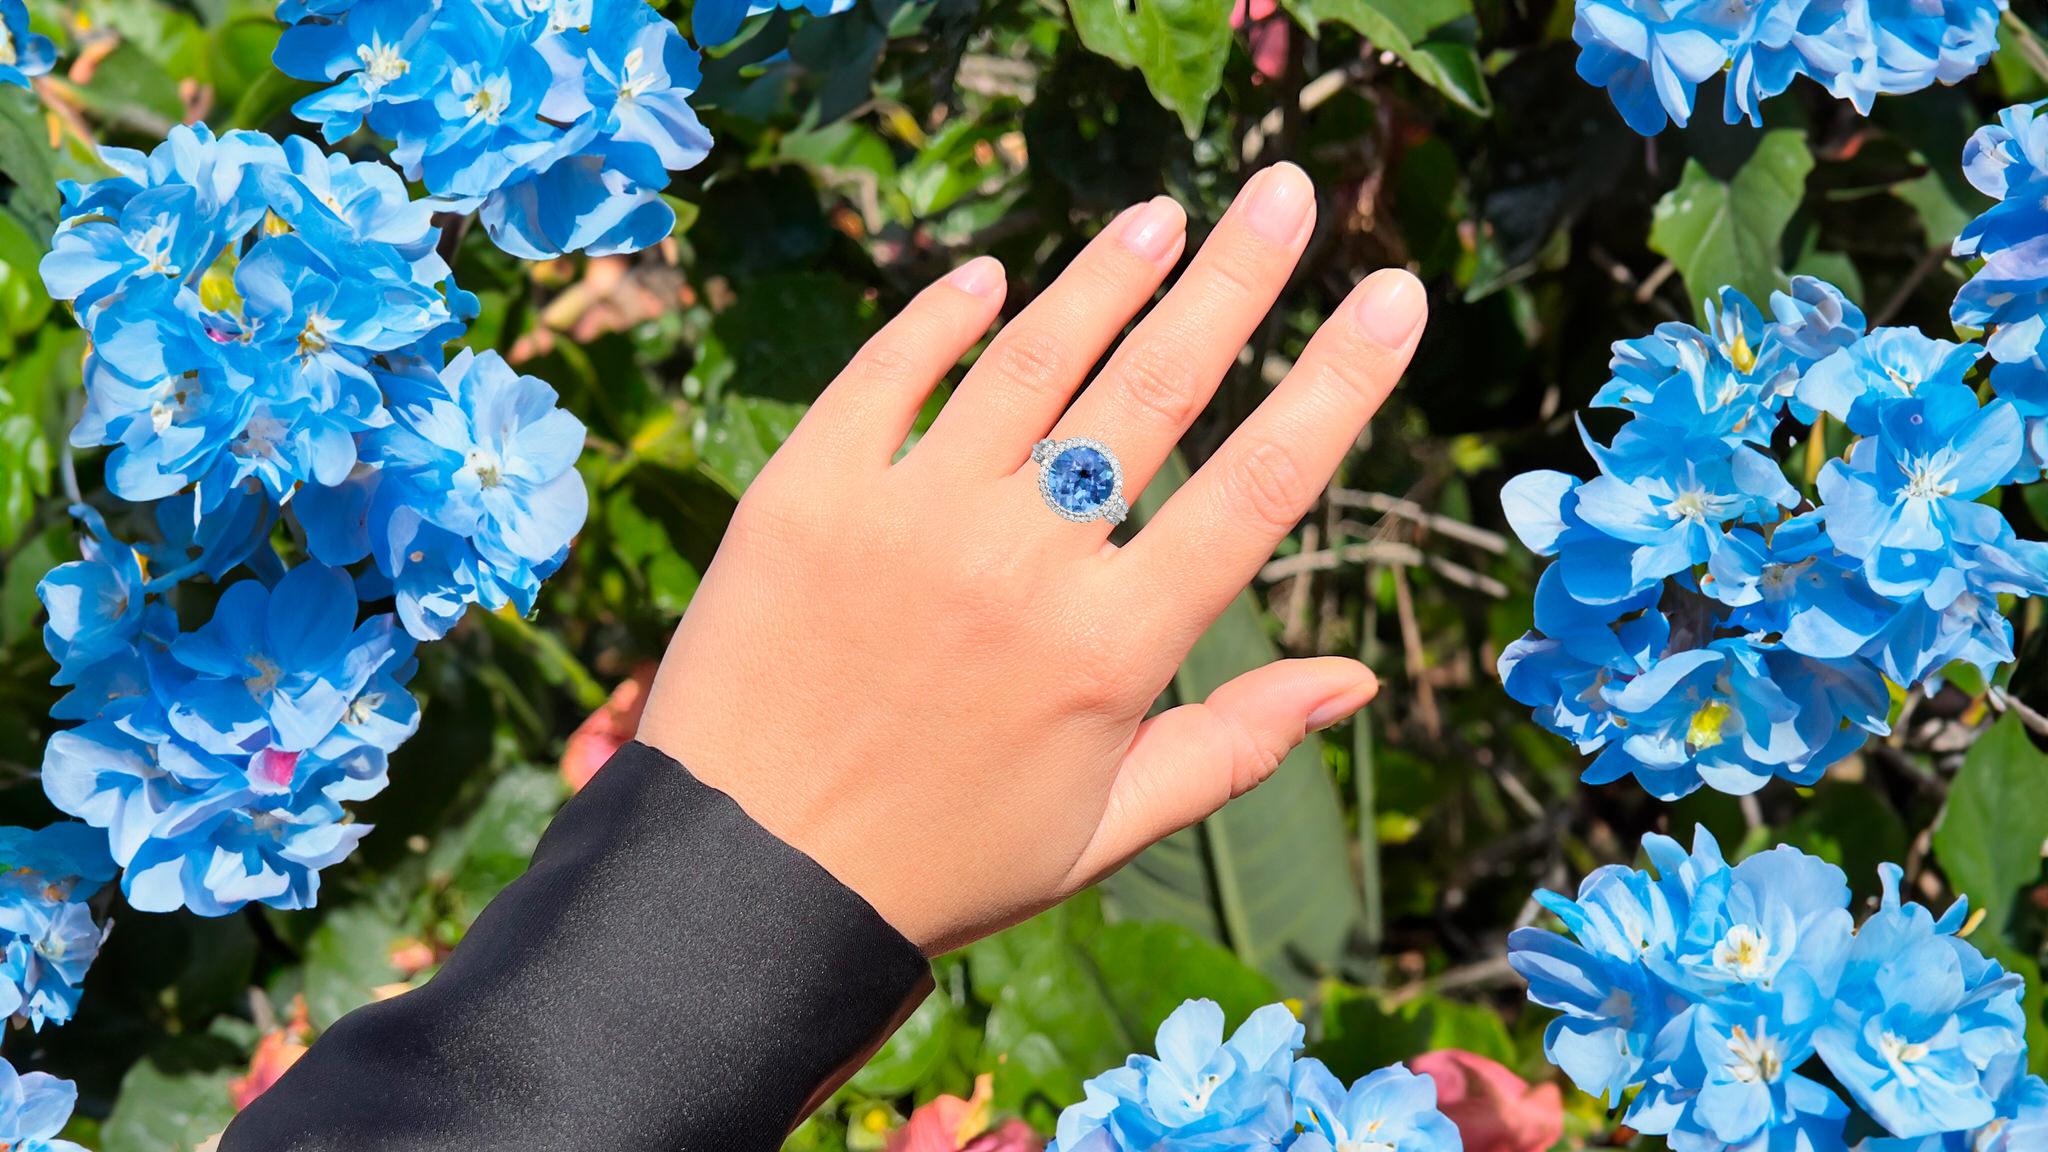 It comes with the Gemological Appraisal by GIA GG/AJP
All Gemstones are Natural
Swiss Blue Topaz = 3.53 Carat
62 Round Diamonds = 0.26 Carats
Metal: 18K White Gold
Ring Size: 6.5* US
*It can be resized complimentary
